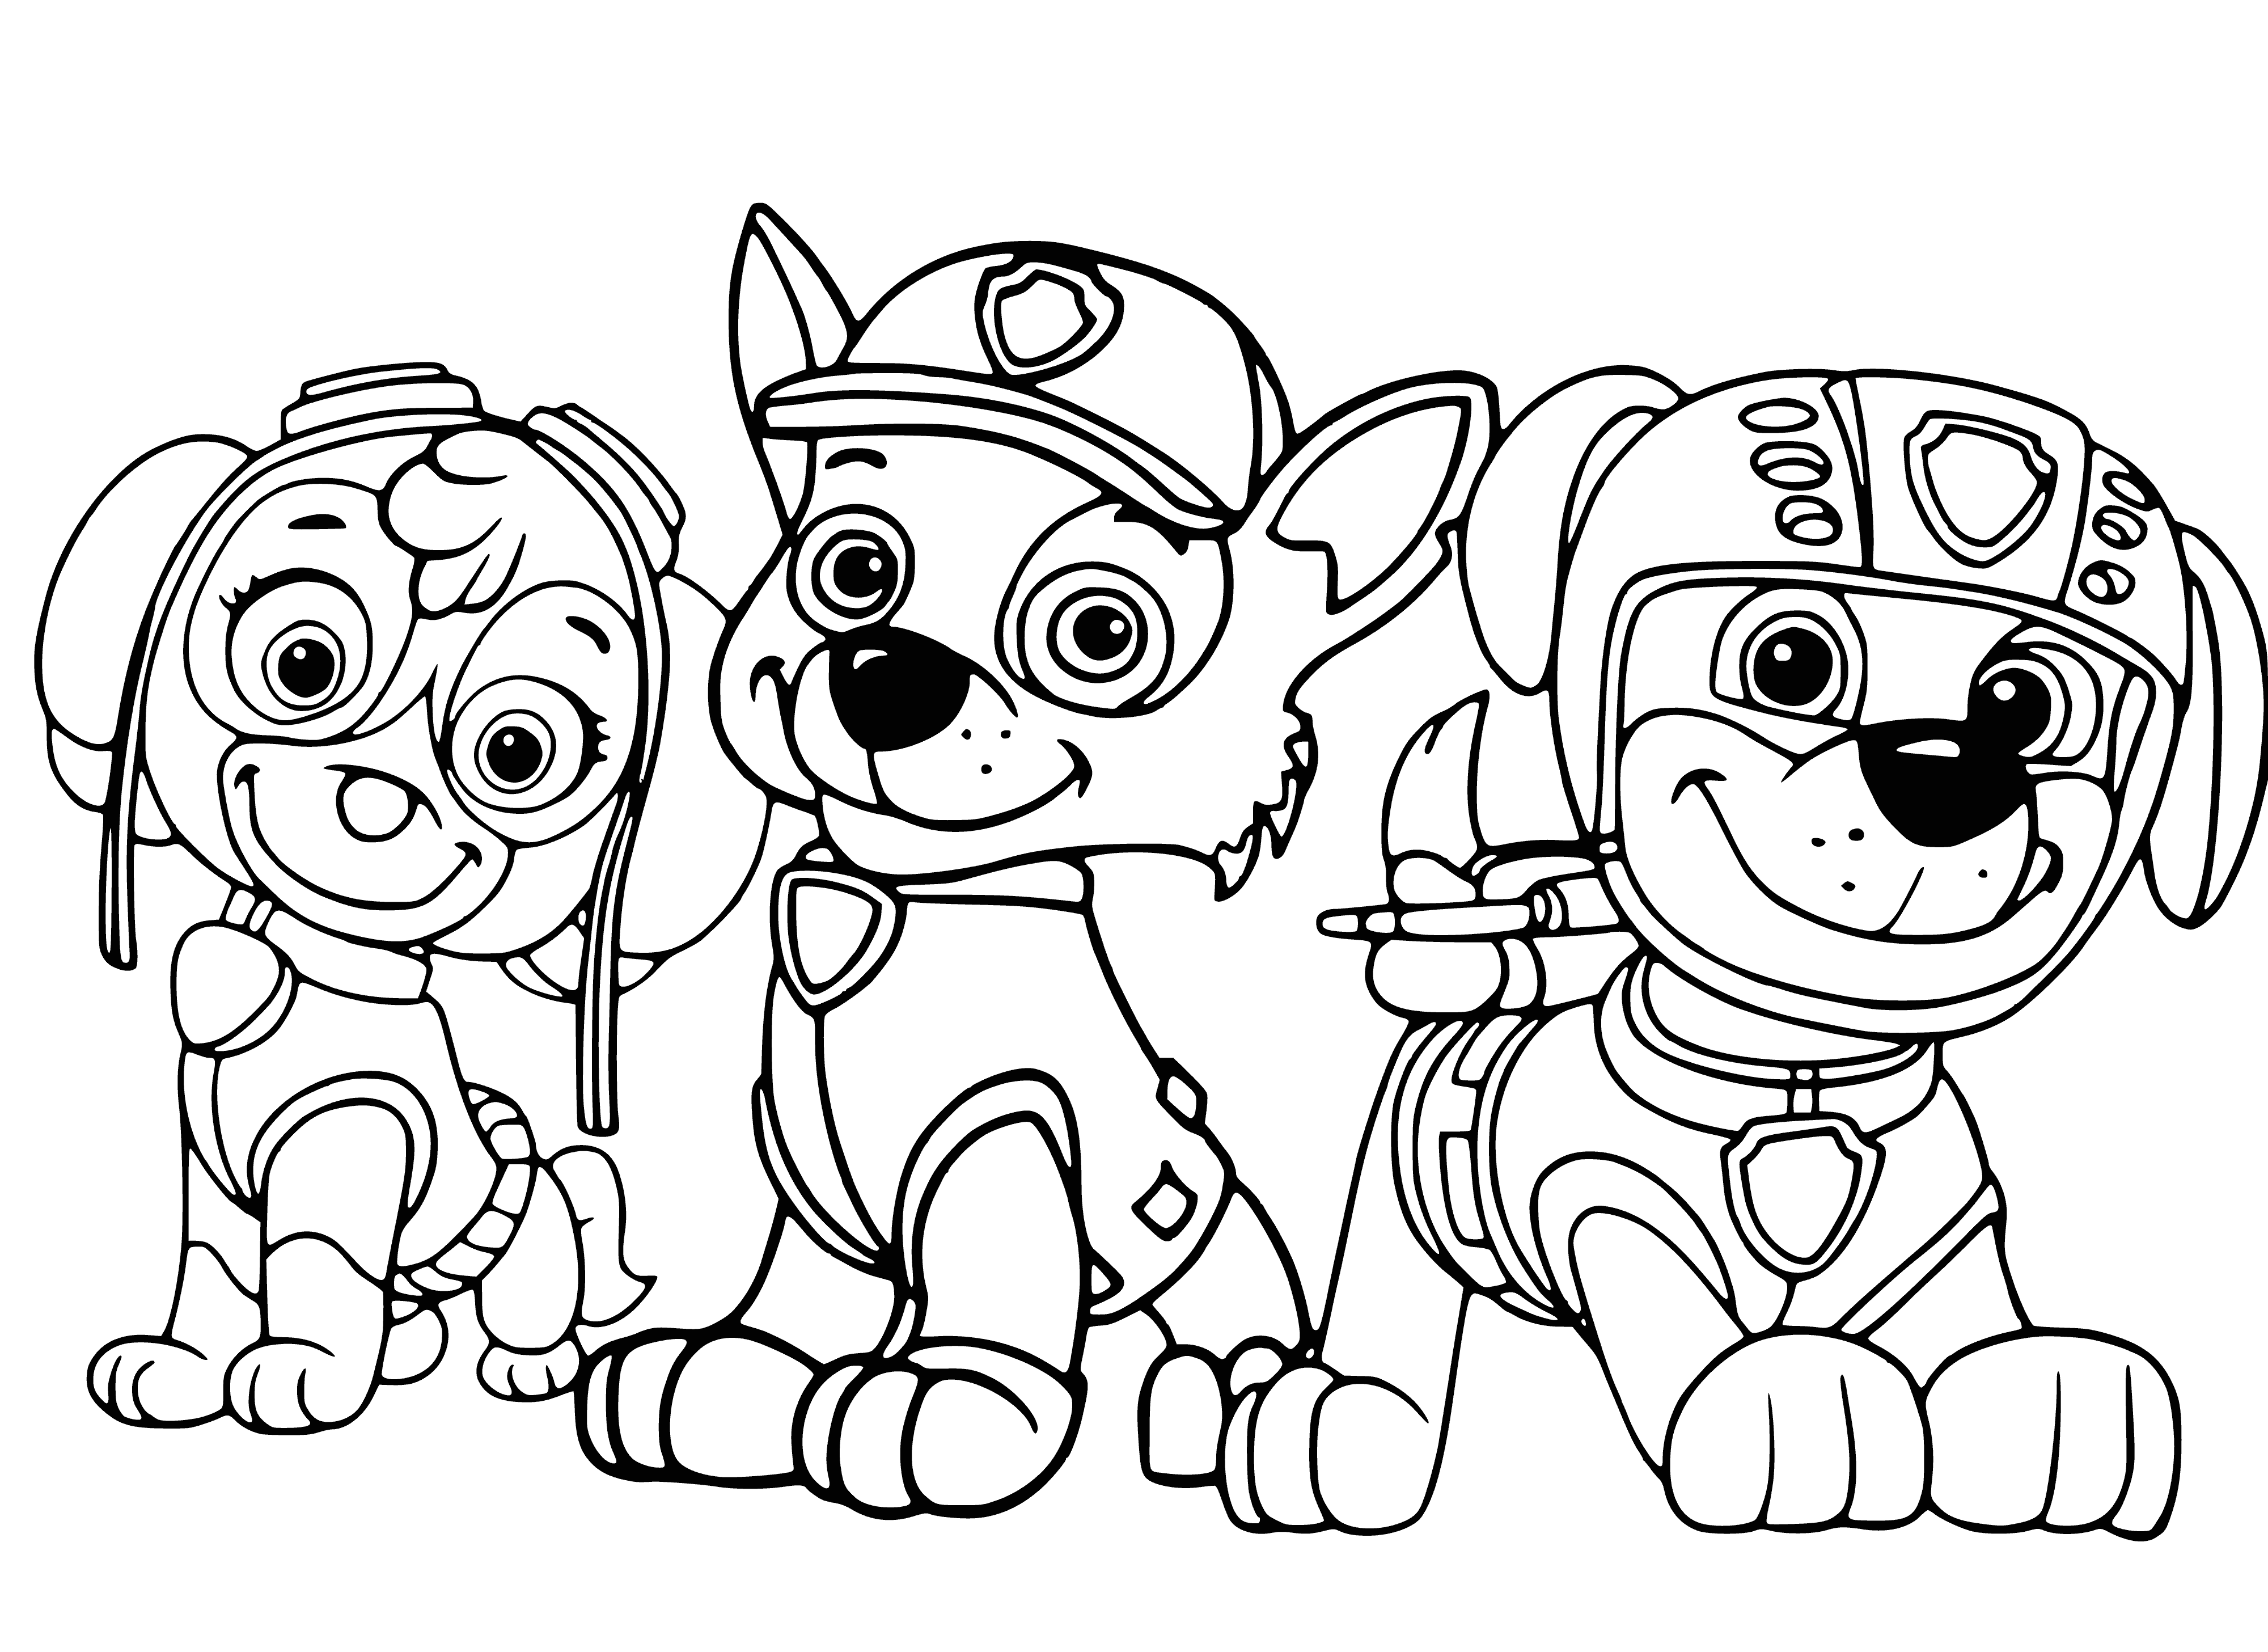 An inseparable trinity coloring page